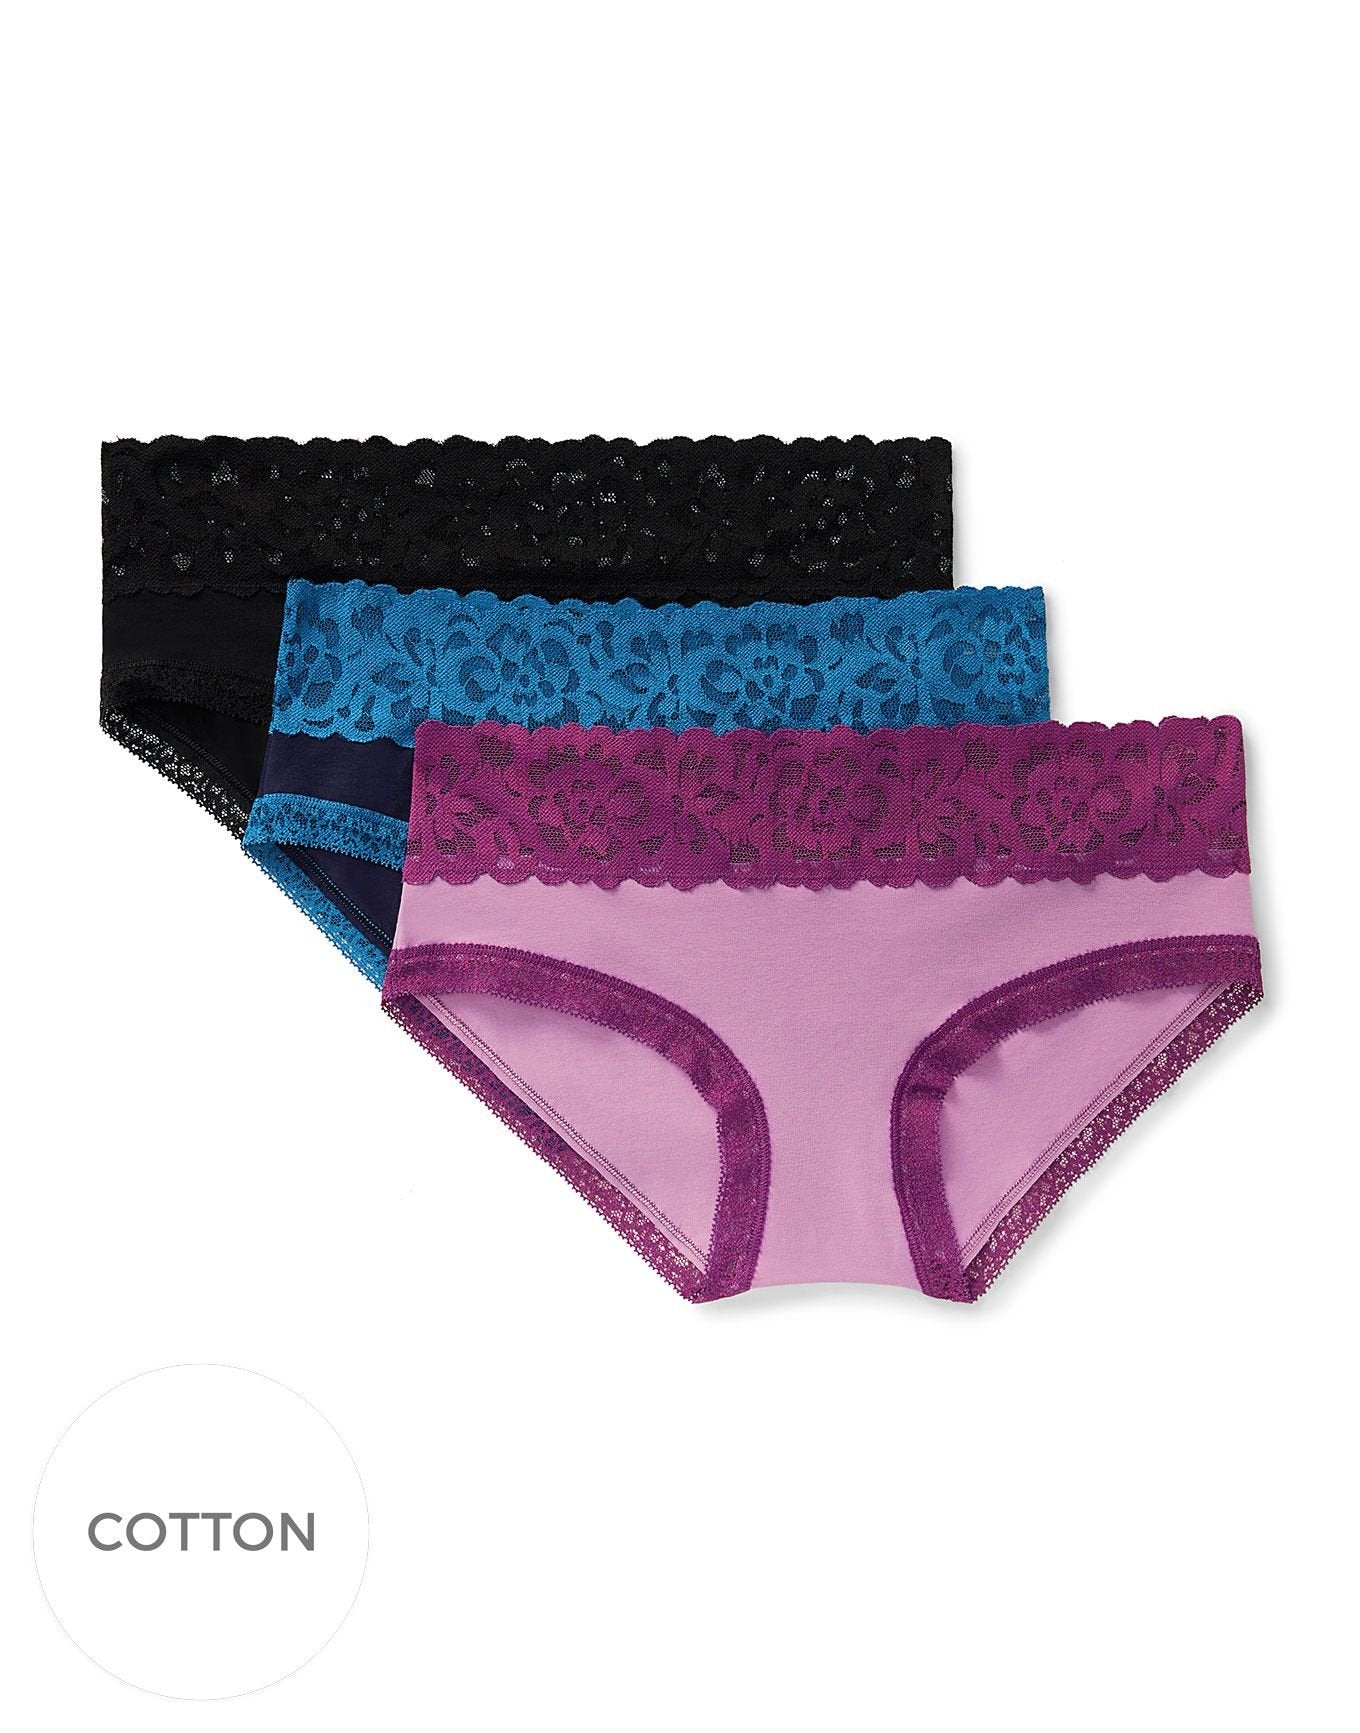 Adore Me Millie Cotton Pack Hipster Panties (Pack of 3) in color Multi- BBP and shape hipster